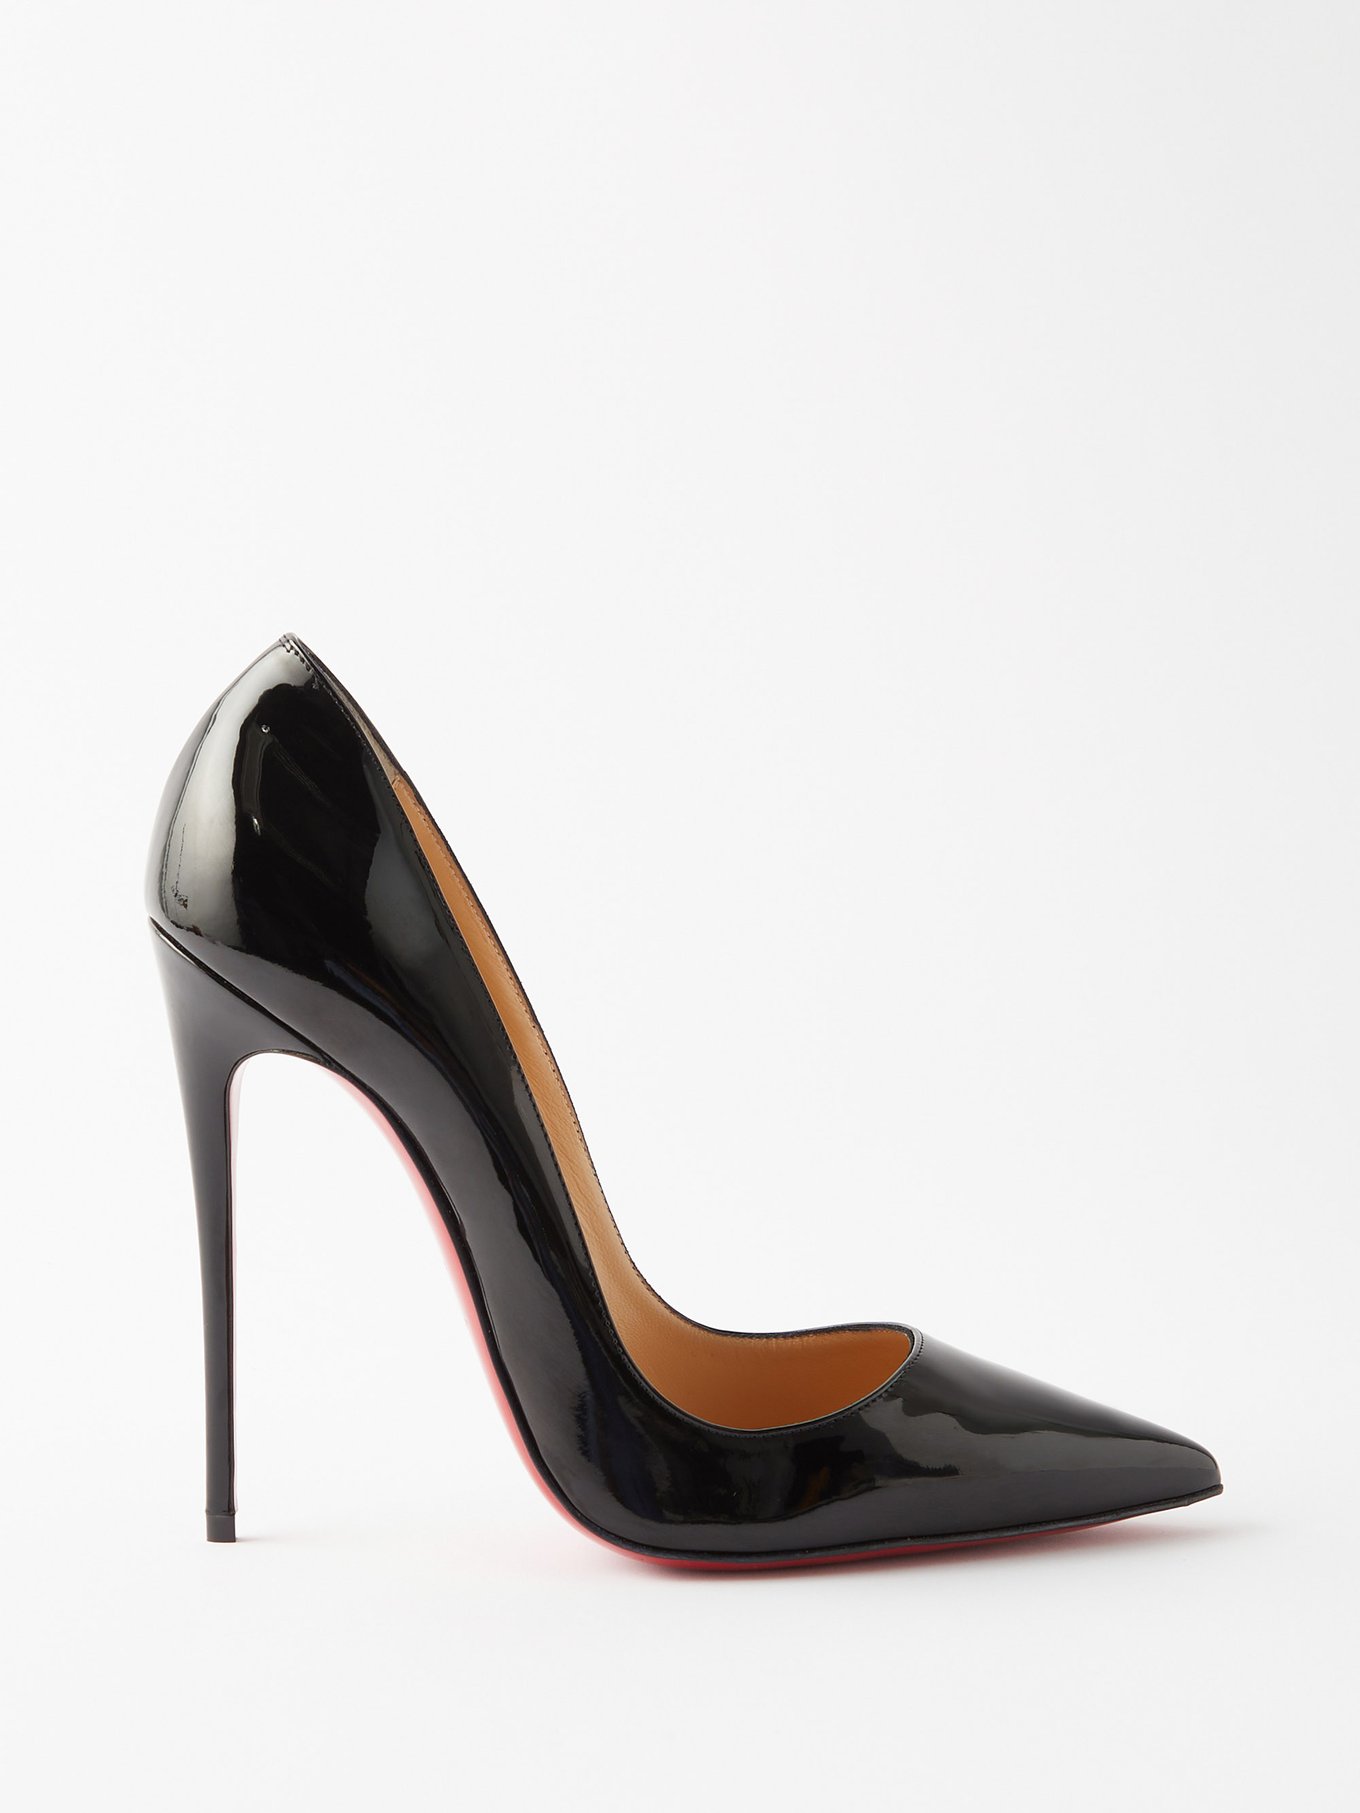 louboutin patent leather pumps